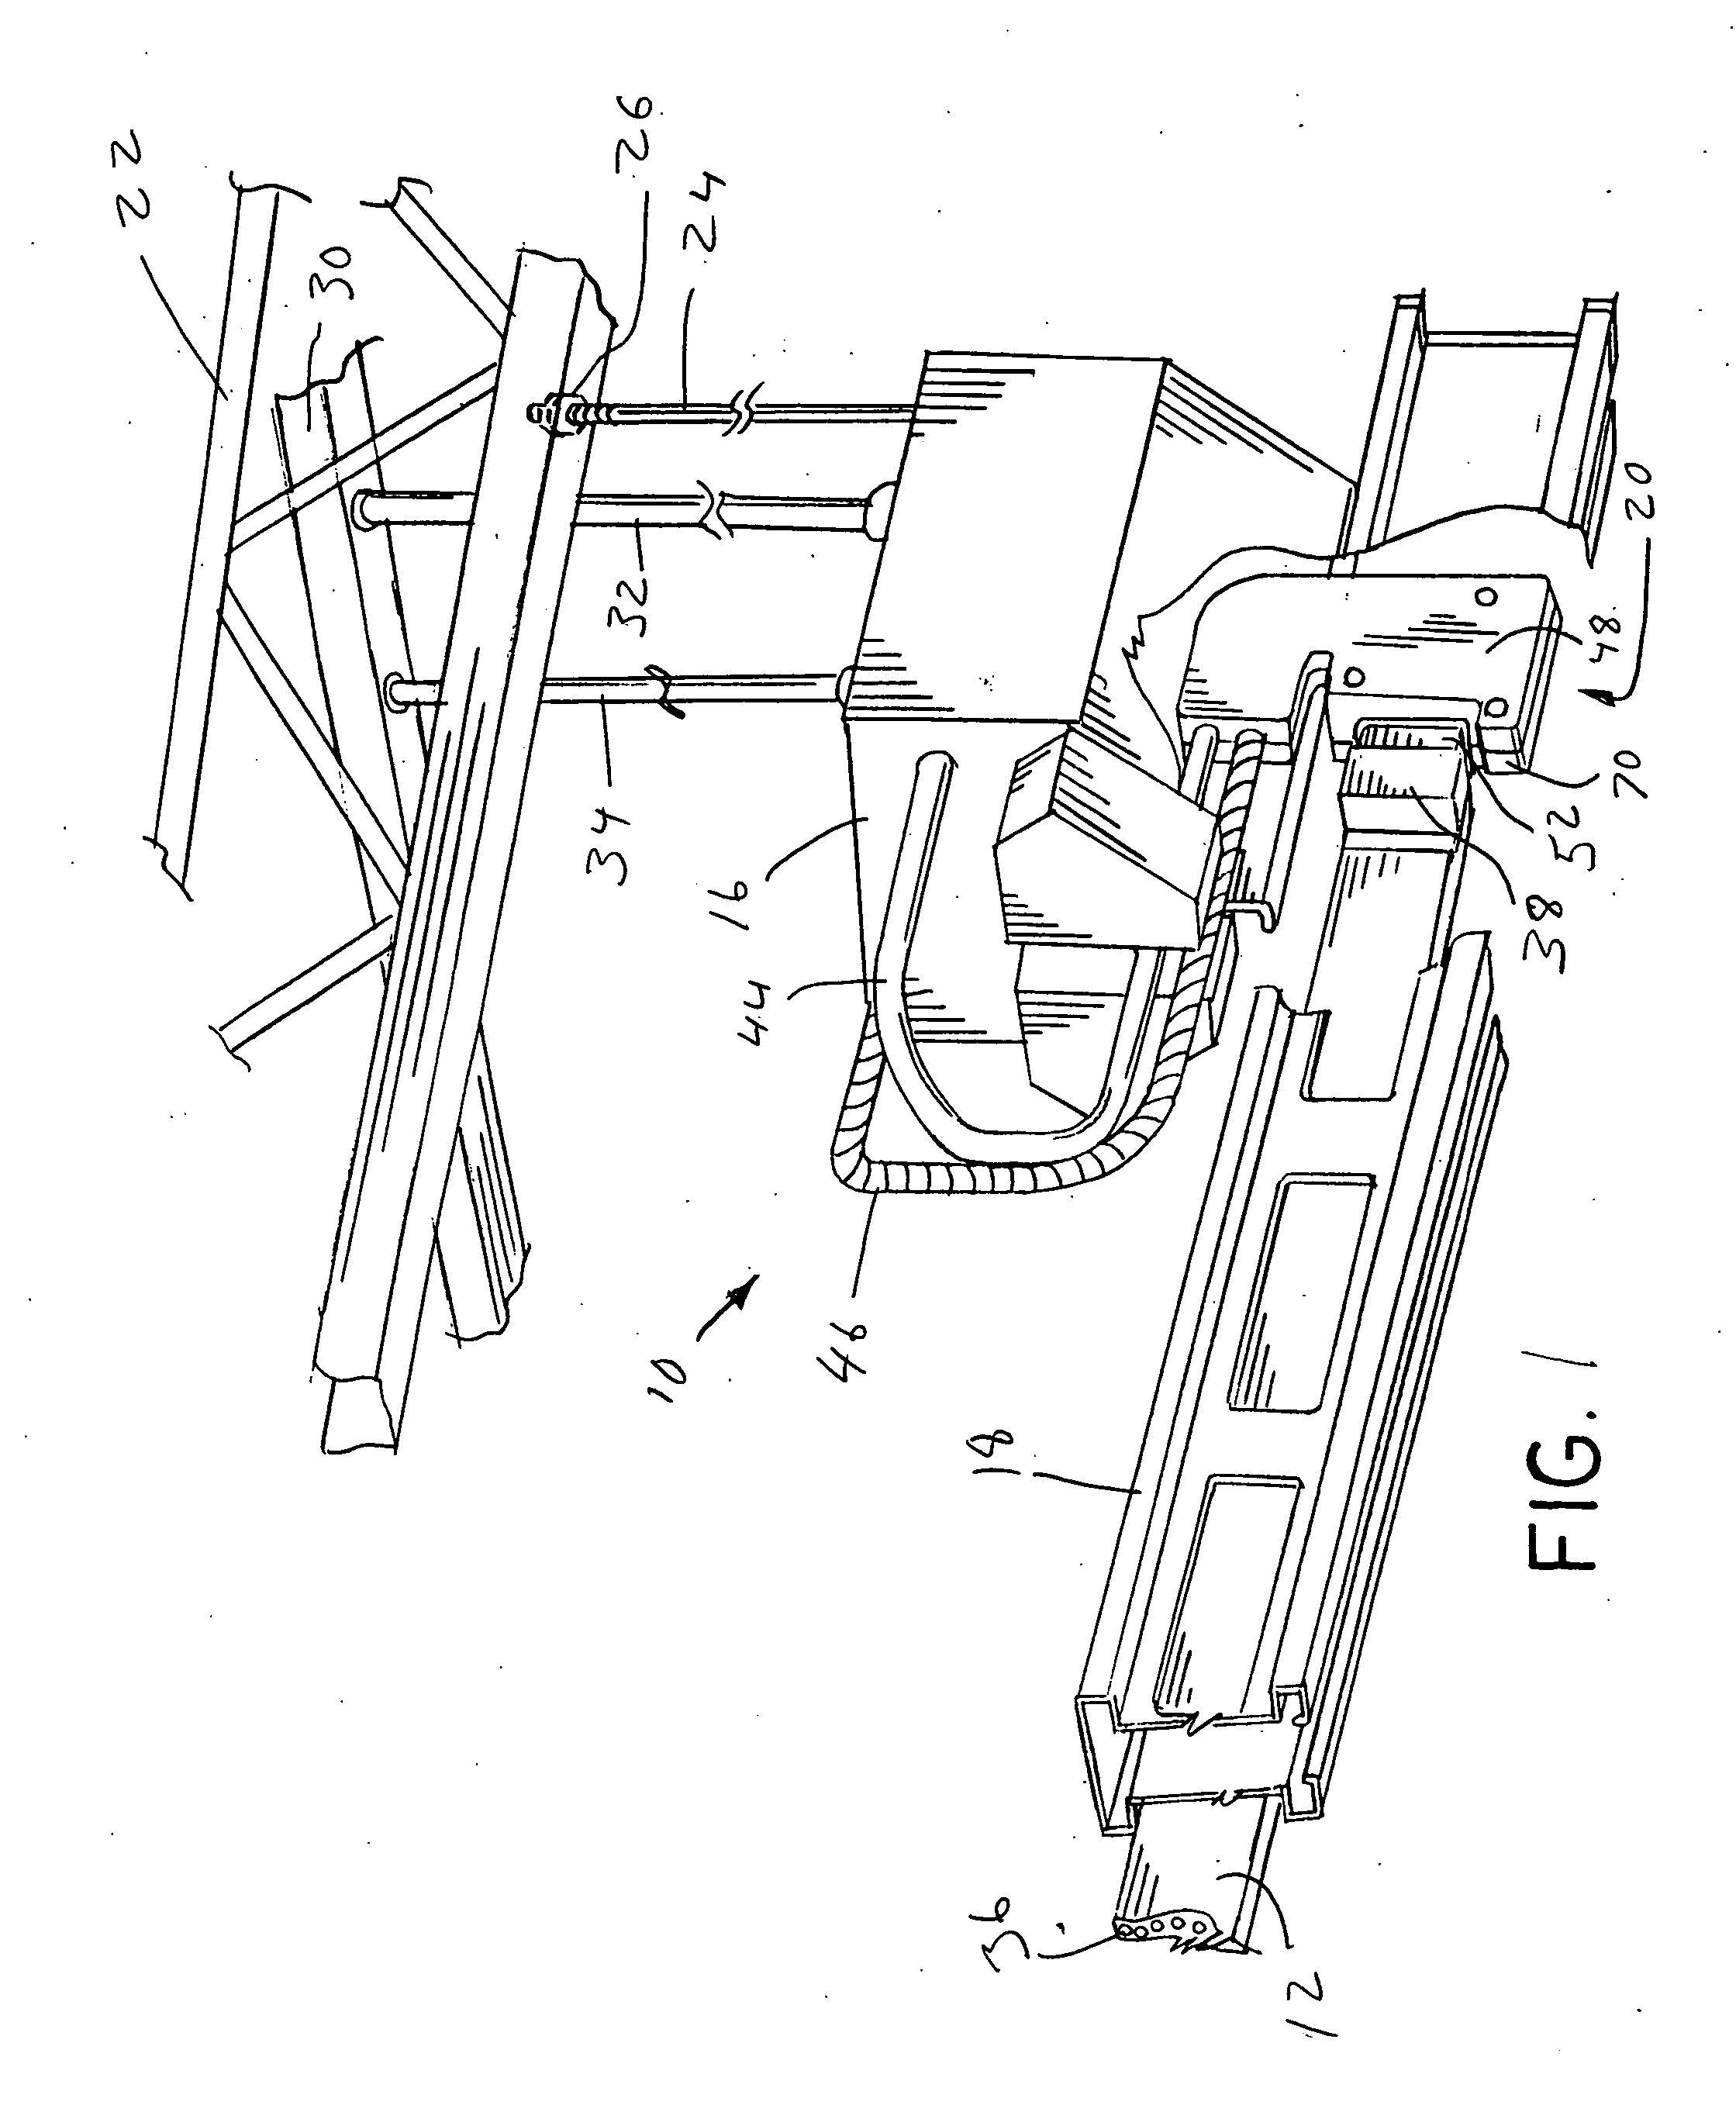 Power entry assembly for an electrical distribution system